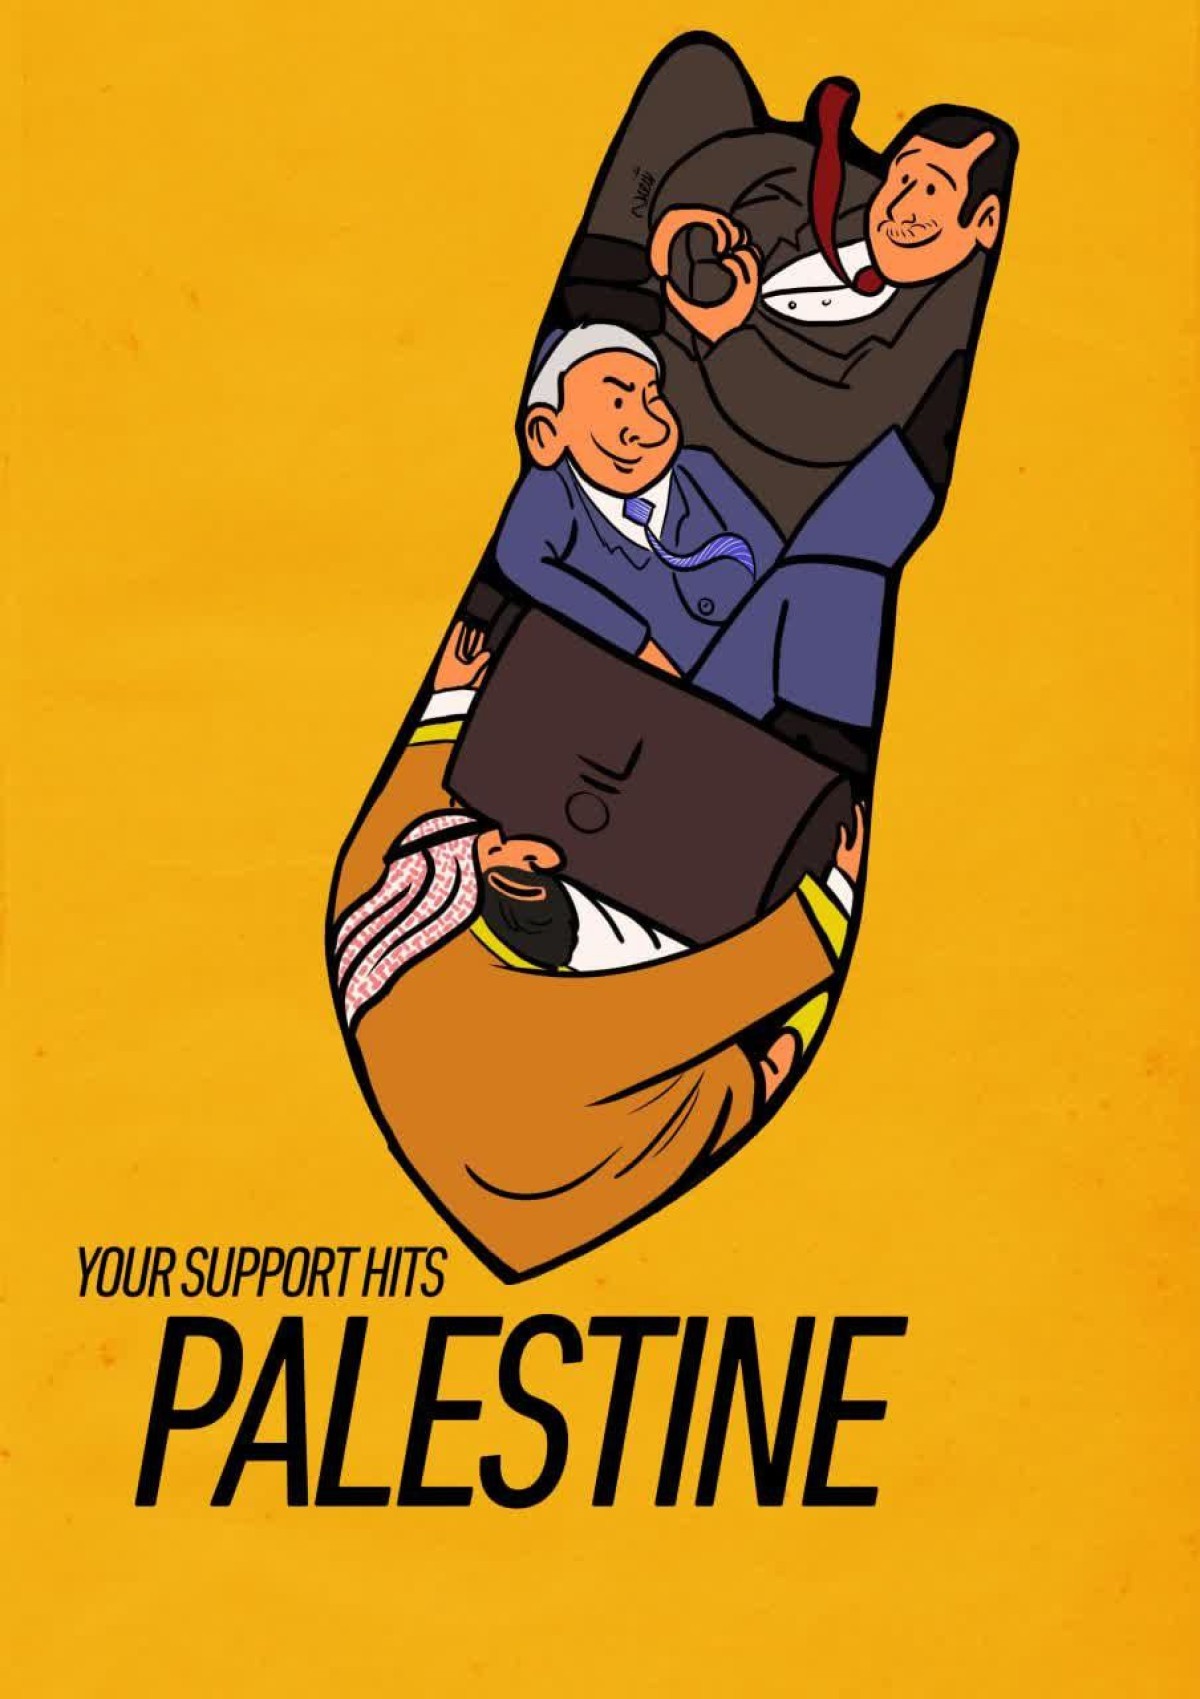 YOUR SUPPORT HITS PALESTINE